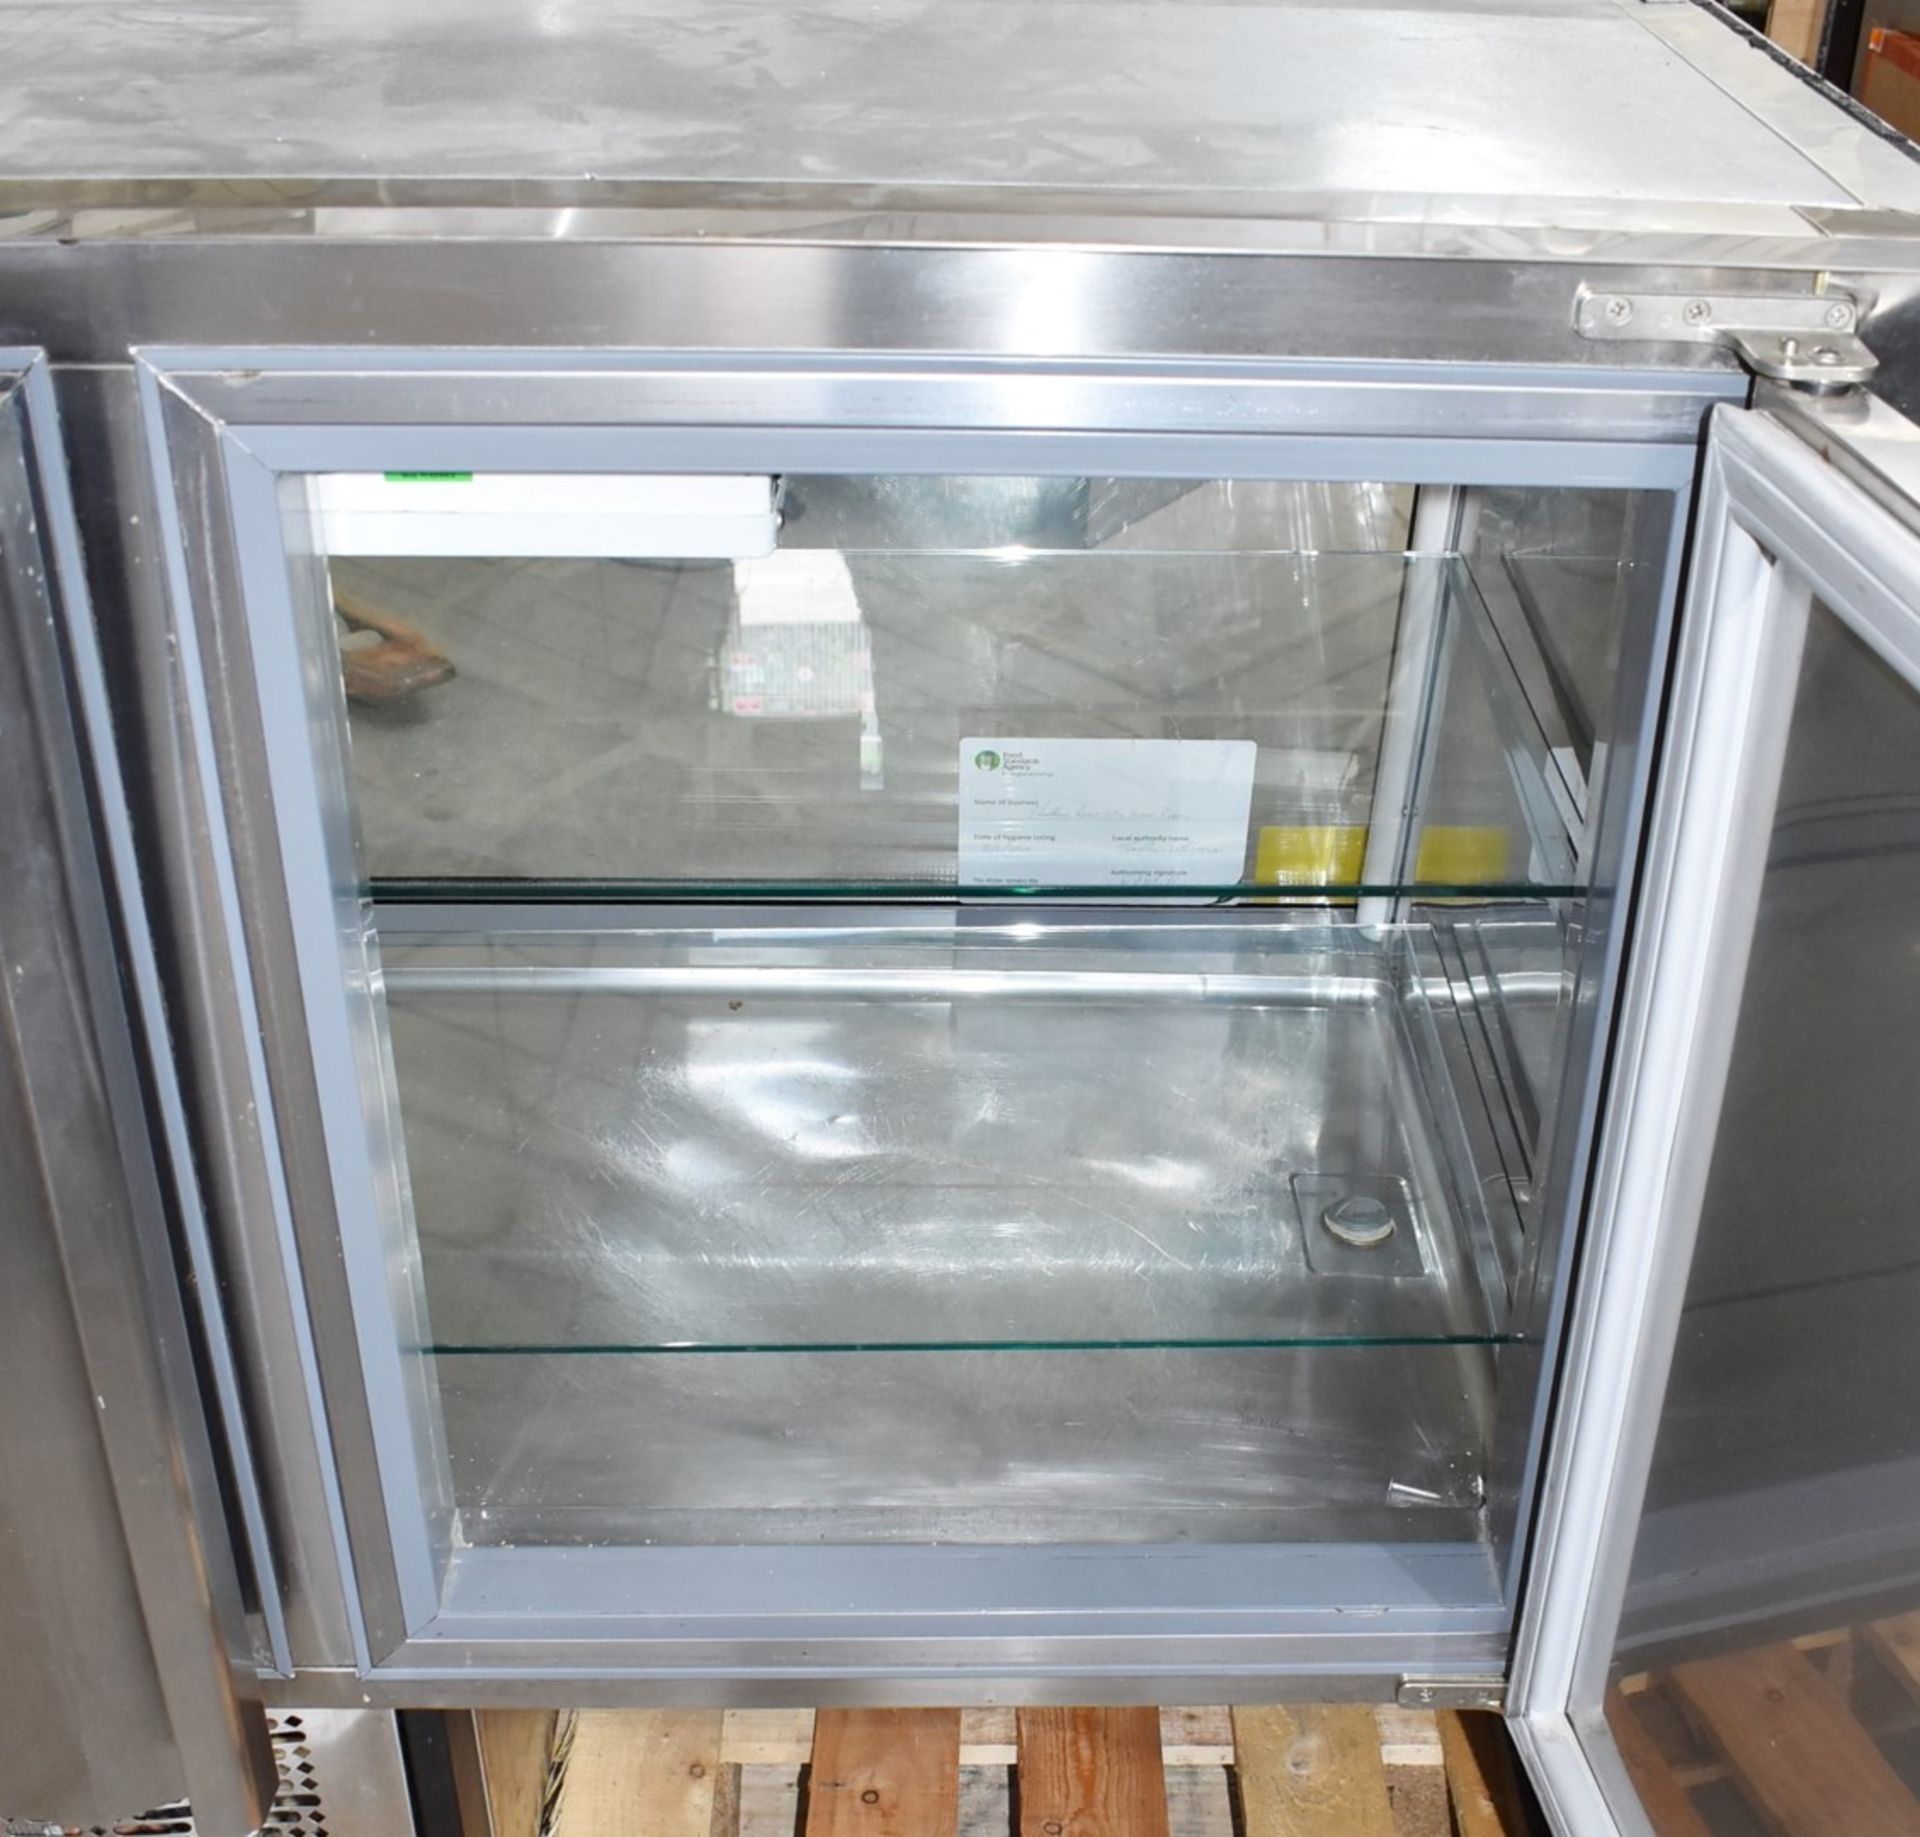 1 x Infrico 1.4m Refrigerated Vision Counter For Takeaways, Sandwich Shops or Cafes - RRP £3,200! - Image 8 of 21